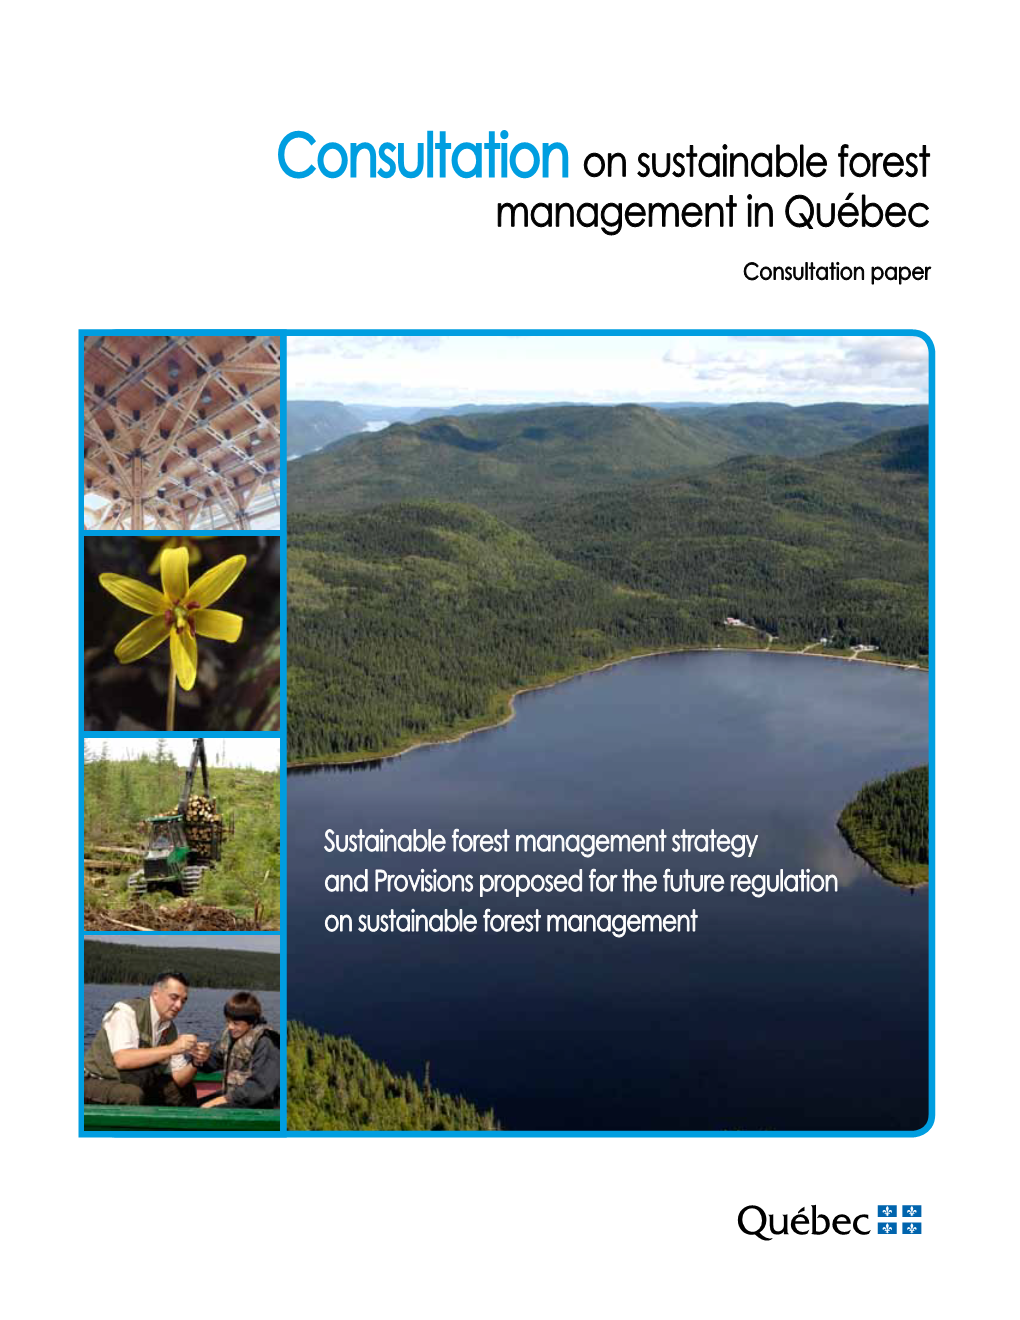 Consultation on Sustainable Forest Management in Québec